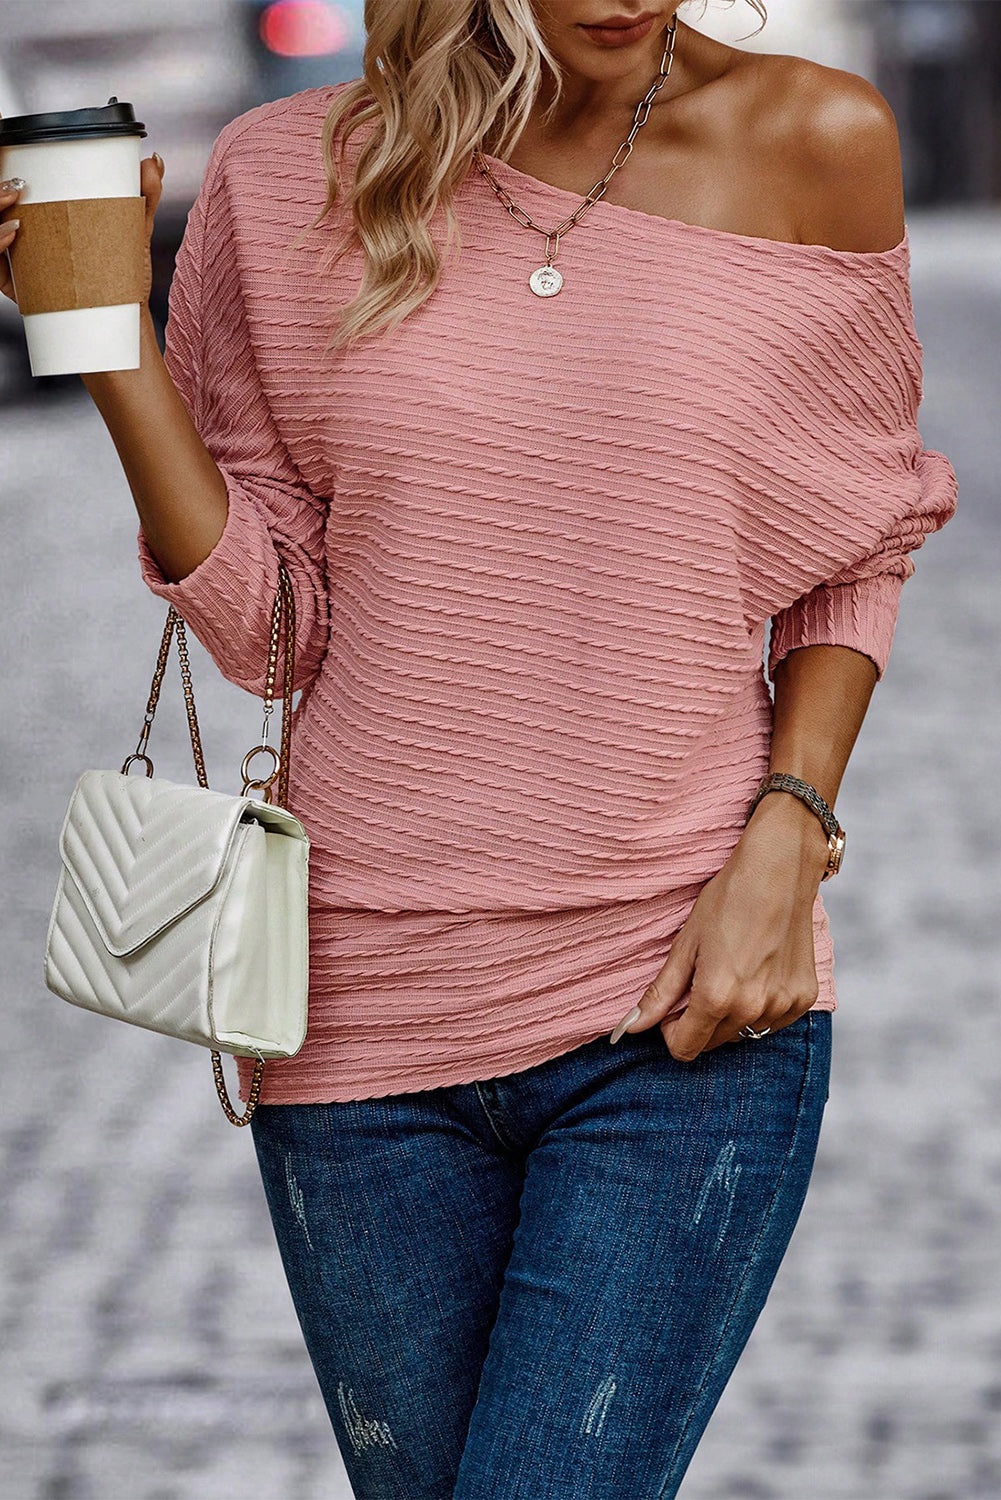 Dusty Pink Textured Knit Long Sleeve Top